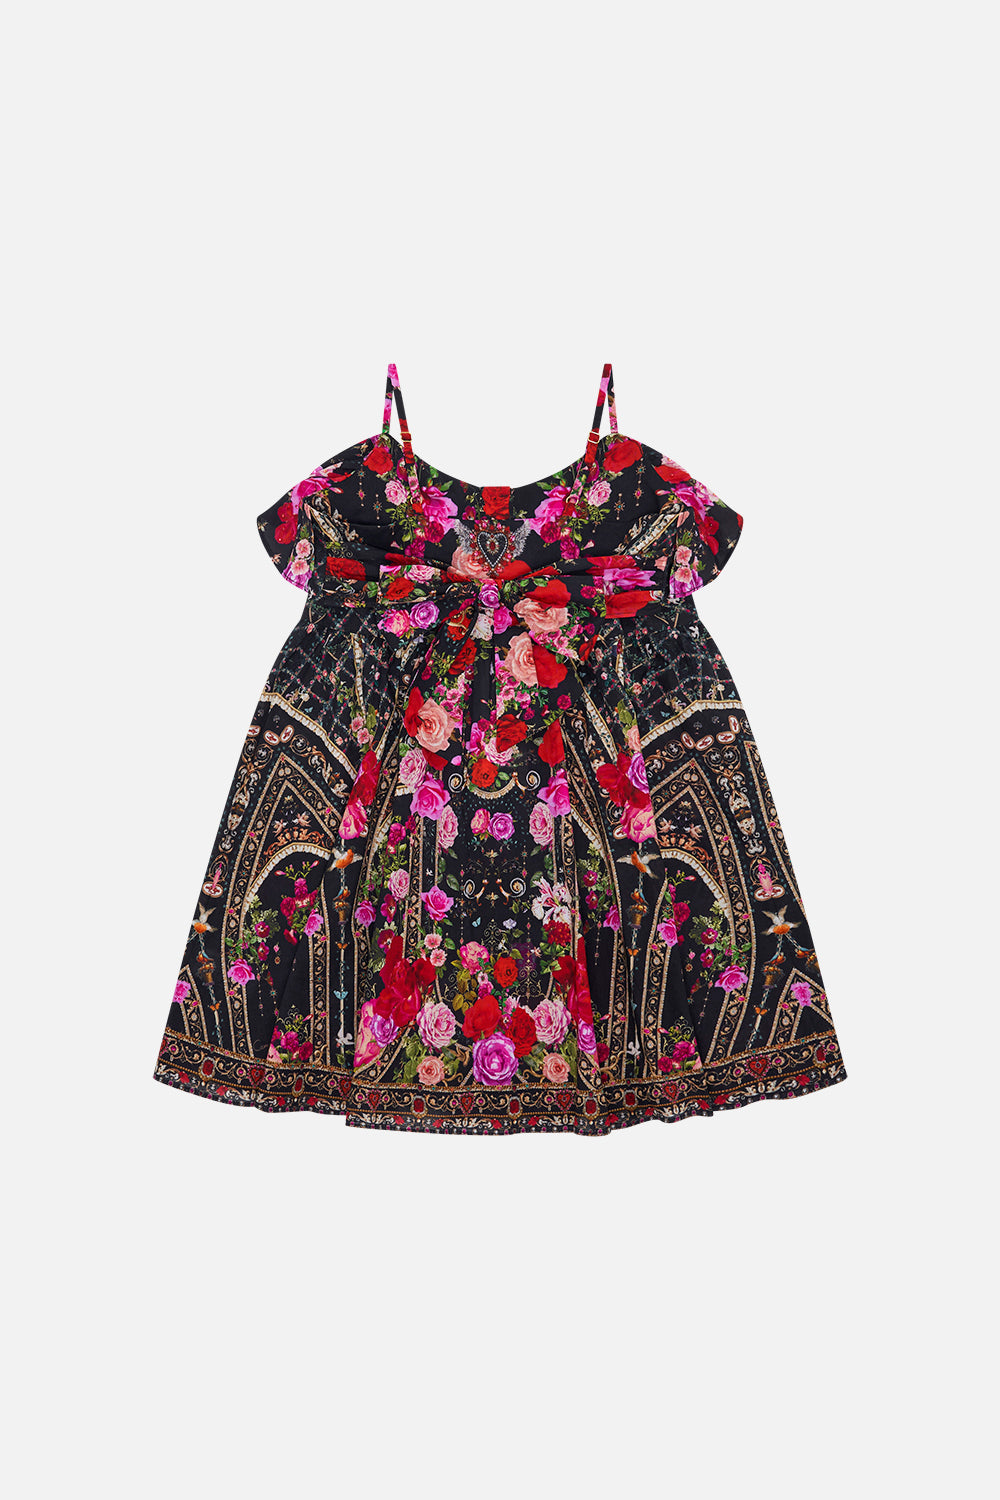 Milla By CAMILLA kids floral strappy dress in Reservation For Love print